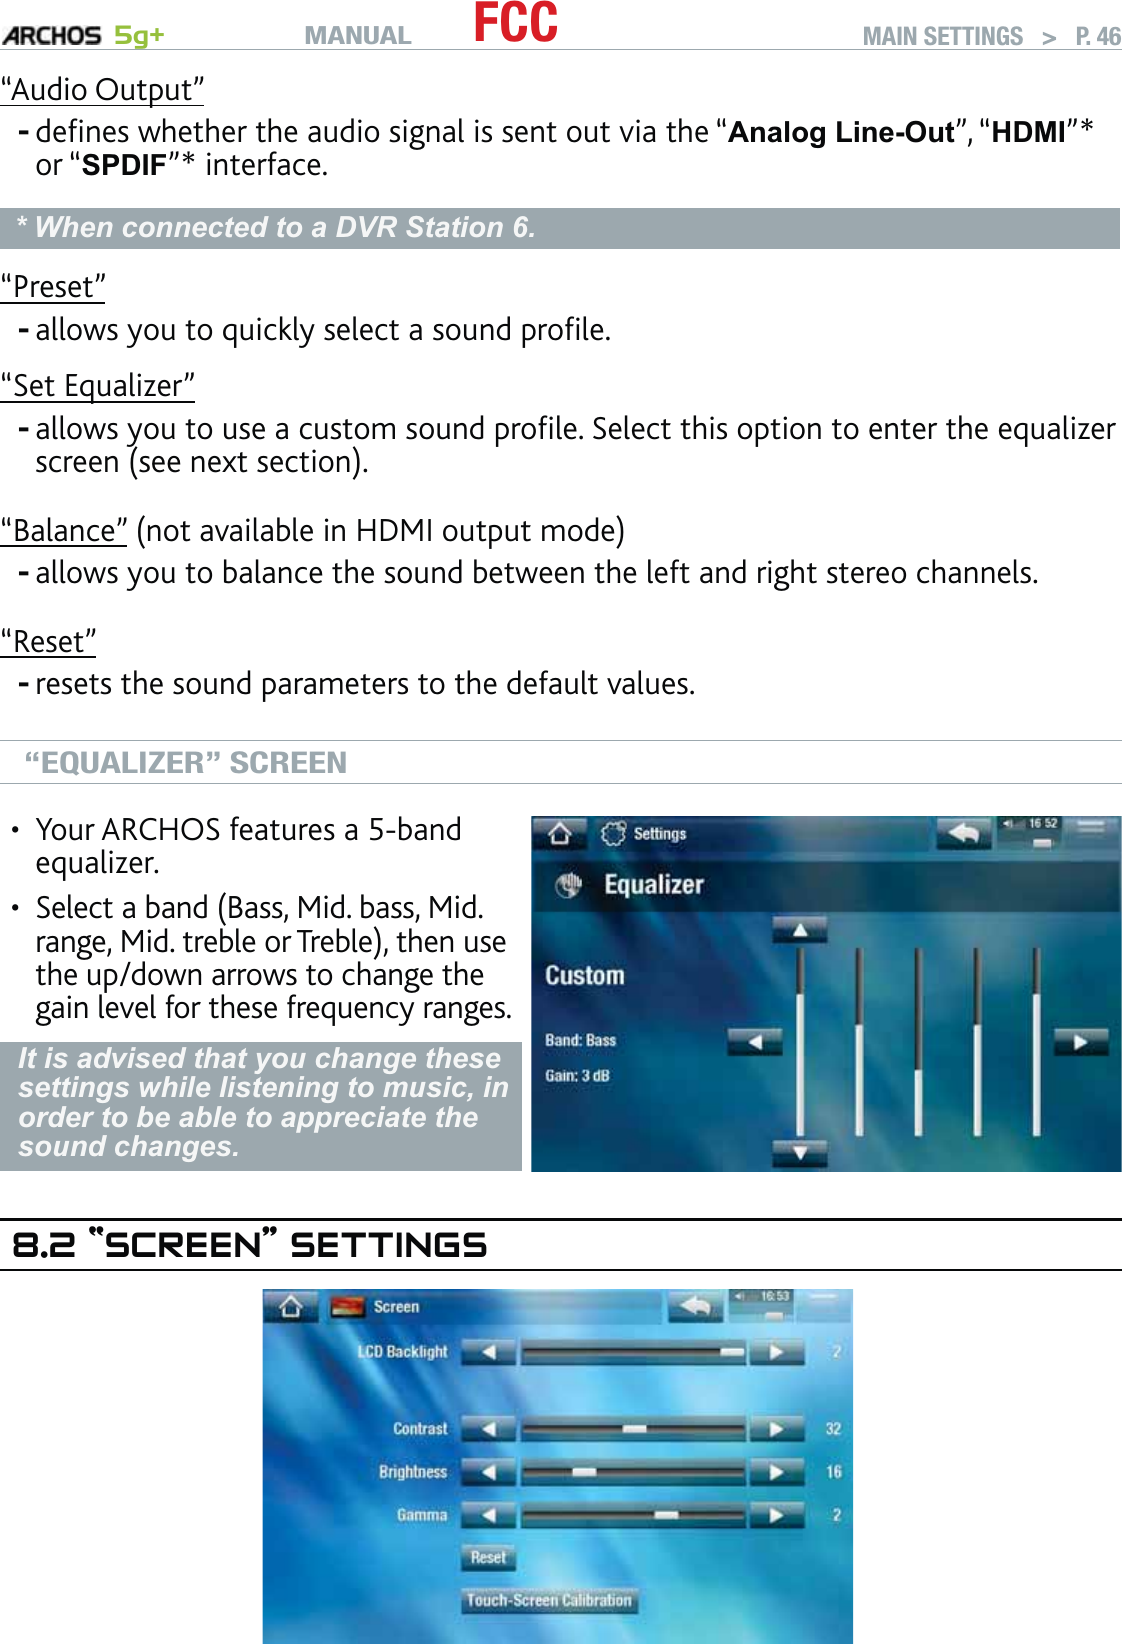 MANUAL 5g+ FCC MAIN SETTINGS   &gt;   P. 46“Audio Output”deﬁnes whether the audio signal is sent out via the “Analog Line-Out”, “HDMI”* or “SPDIF”* interface.* When connected to a DVR Station 6.“Preset”allows you to quickly select a sound proﬁle.“Set Equalizer”allows you to use a custom sound proﬁle. Select this option to enter the equalizer screen (see next section).“Balance” (not available in HDMI output mode)allows you to balance the sound between the left and right stereo channels.“Reset”resets the sound parameters to the default values.“EQUALIZER” SCREENYour ARCHOS features a 5-band equalizer.Select a band (Bass, Mid. bass, Mid. range, Mid. treble or Treble), then use the up/down arrows to change the gain level for these frequency ranges.••It is advised that you change these settings while listening to music, in order to be able to appreciate the sound changes.8.2 “SCREEN” SETTINGS-----